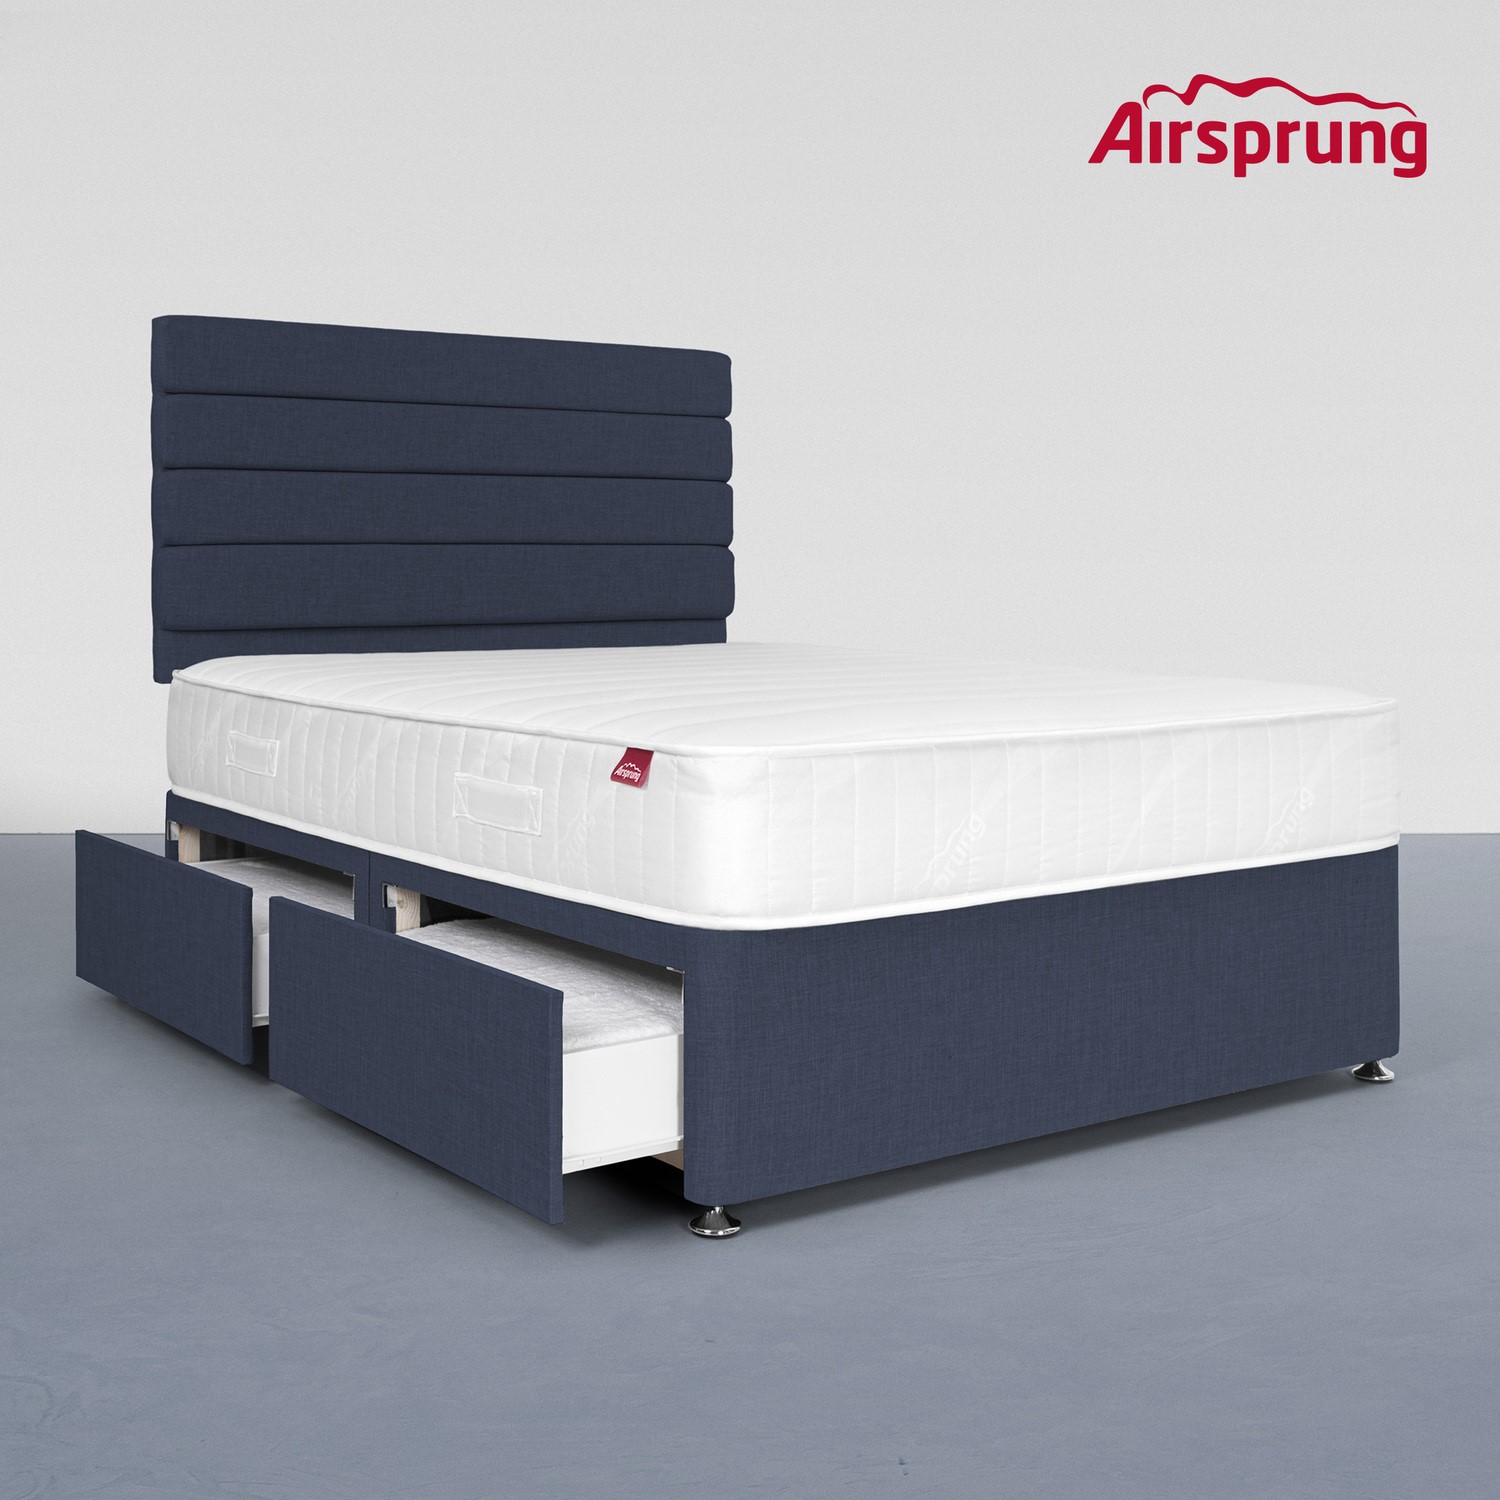 Read more about Airsprung king size 4 drawer divan bed with hybrid mattress midnight blue